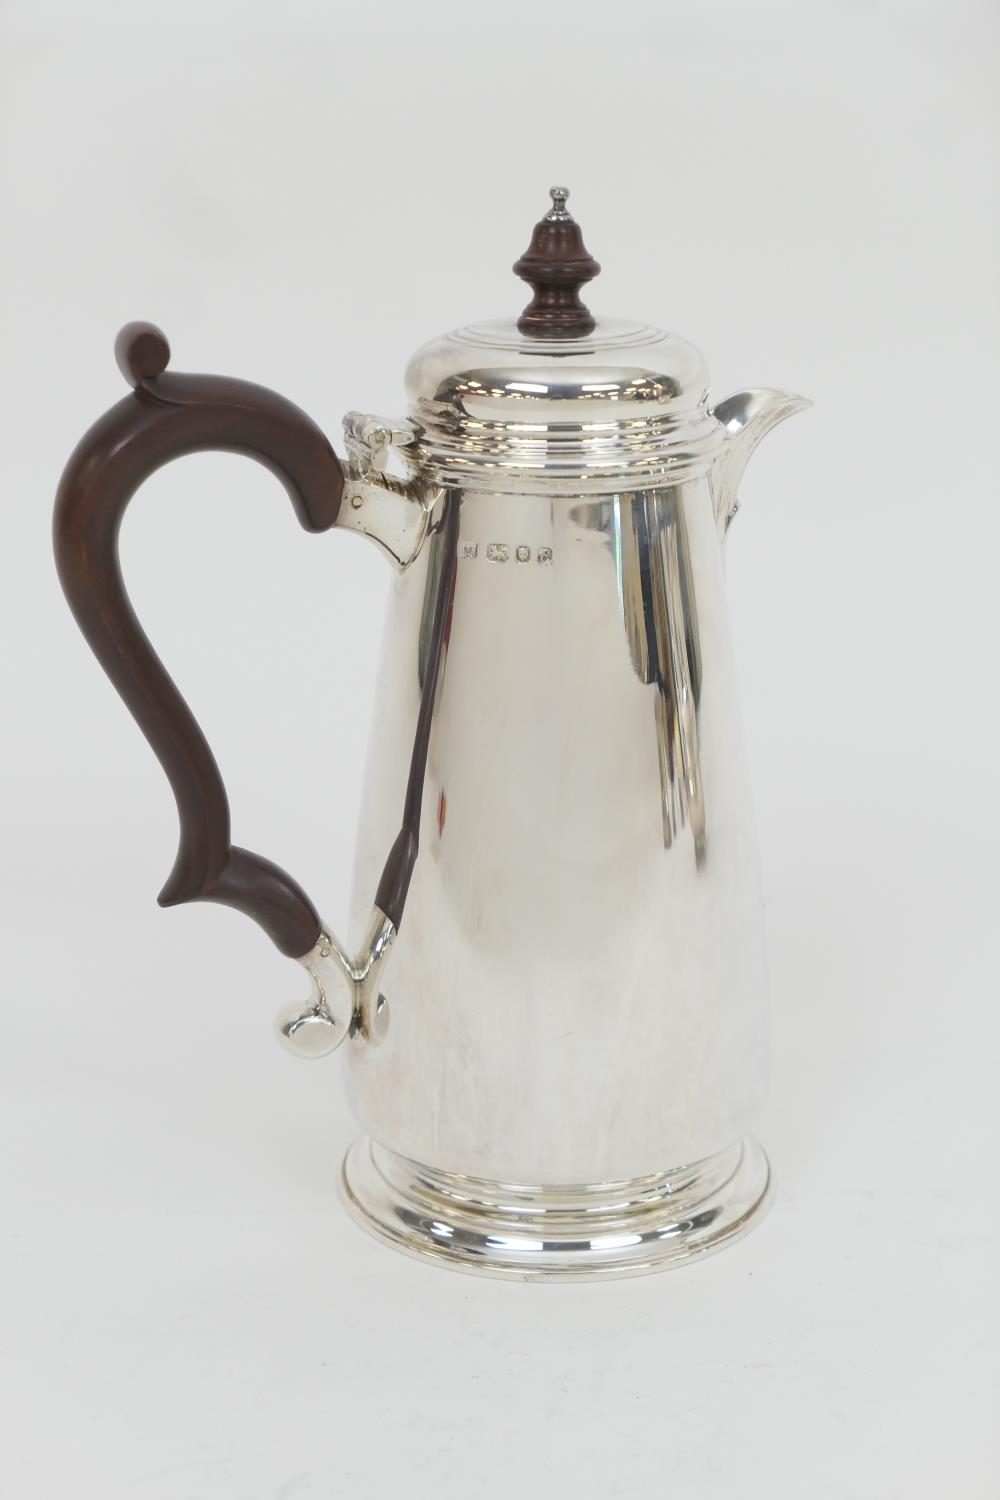 Elizabeth II silver hot water jug, maker R C, London 1979, hinged cover with turned wooden finial